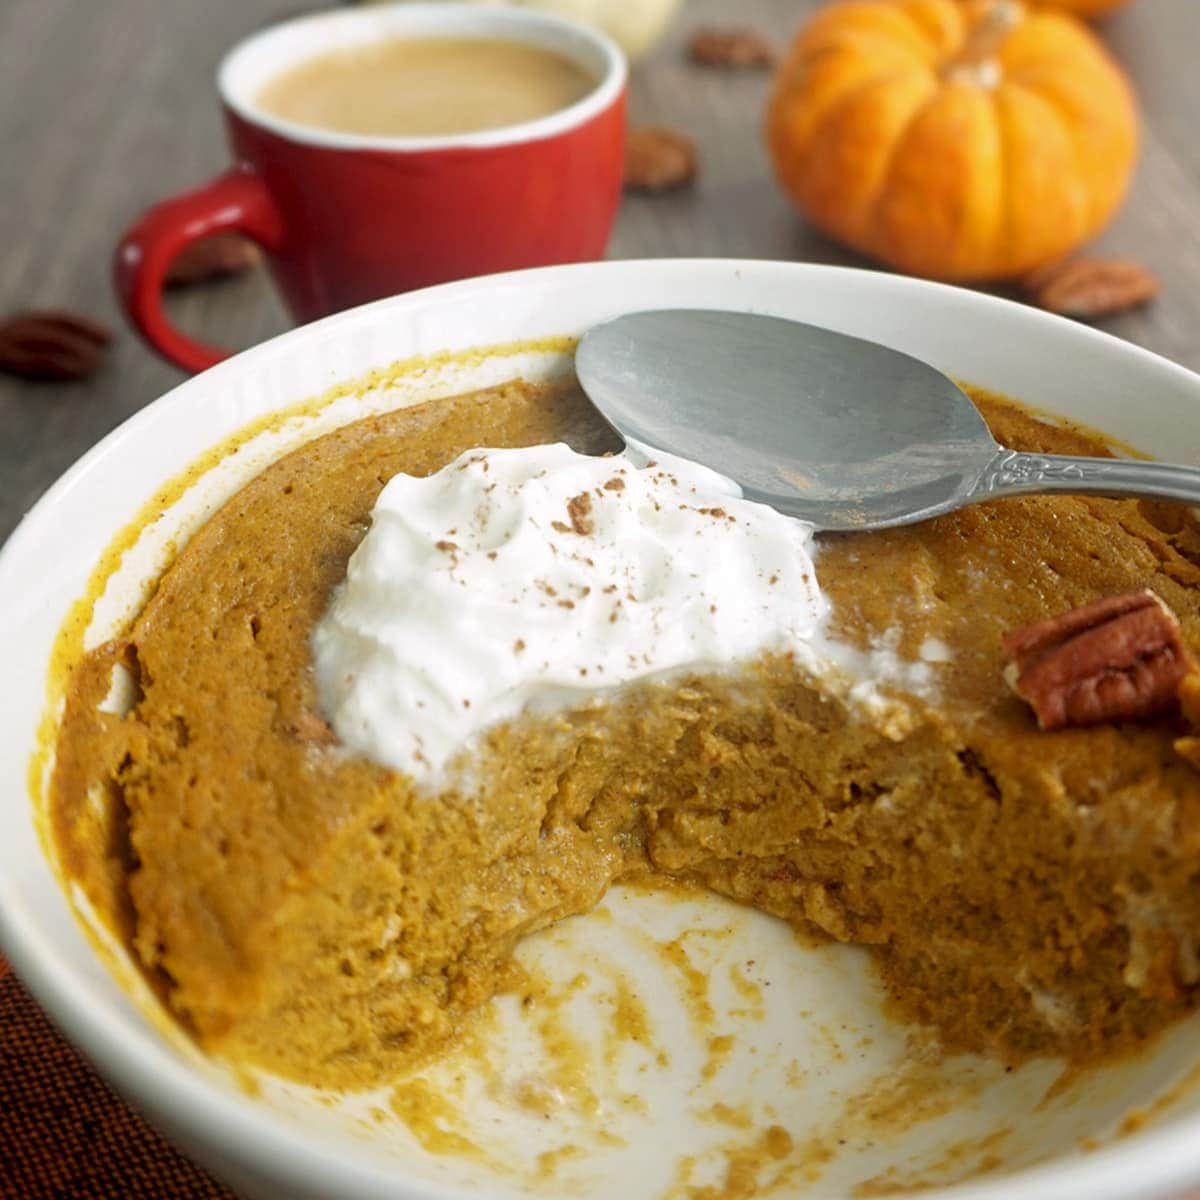 A bowl of half-eaten pumpkin pie with a mug of coffee on the side